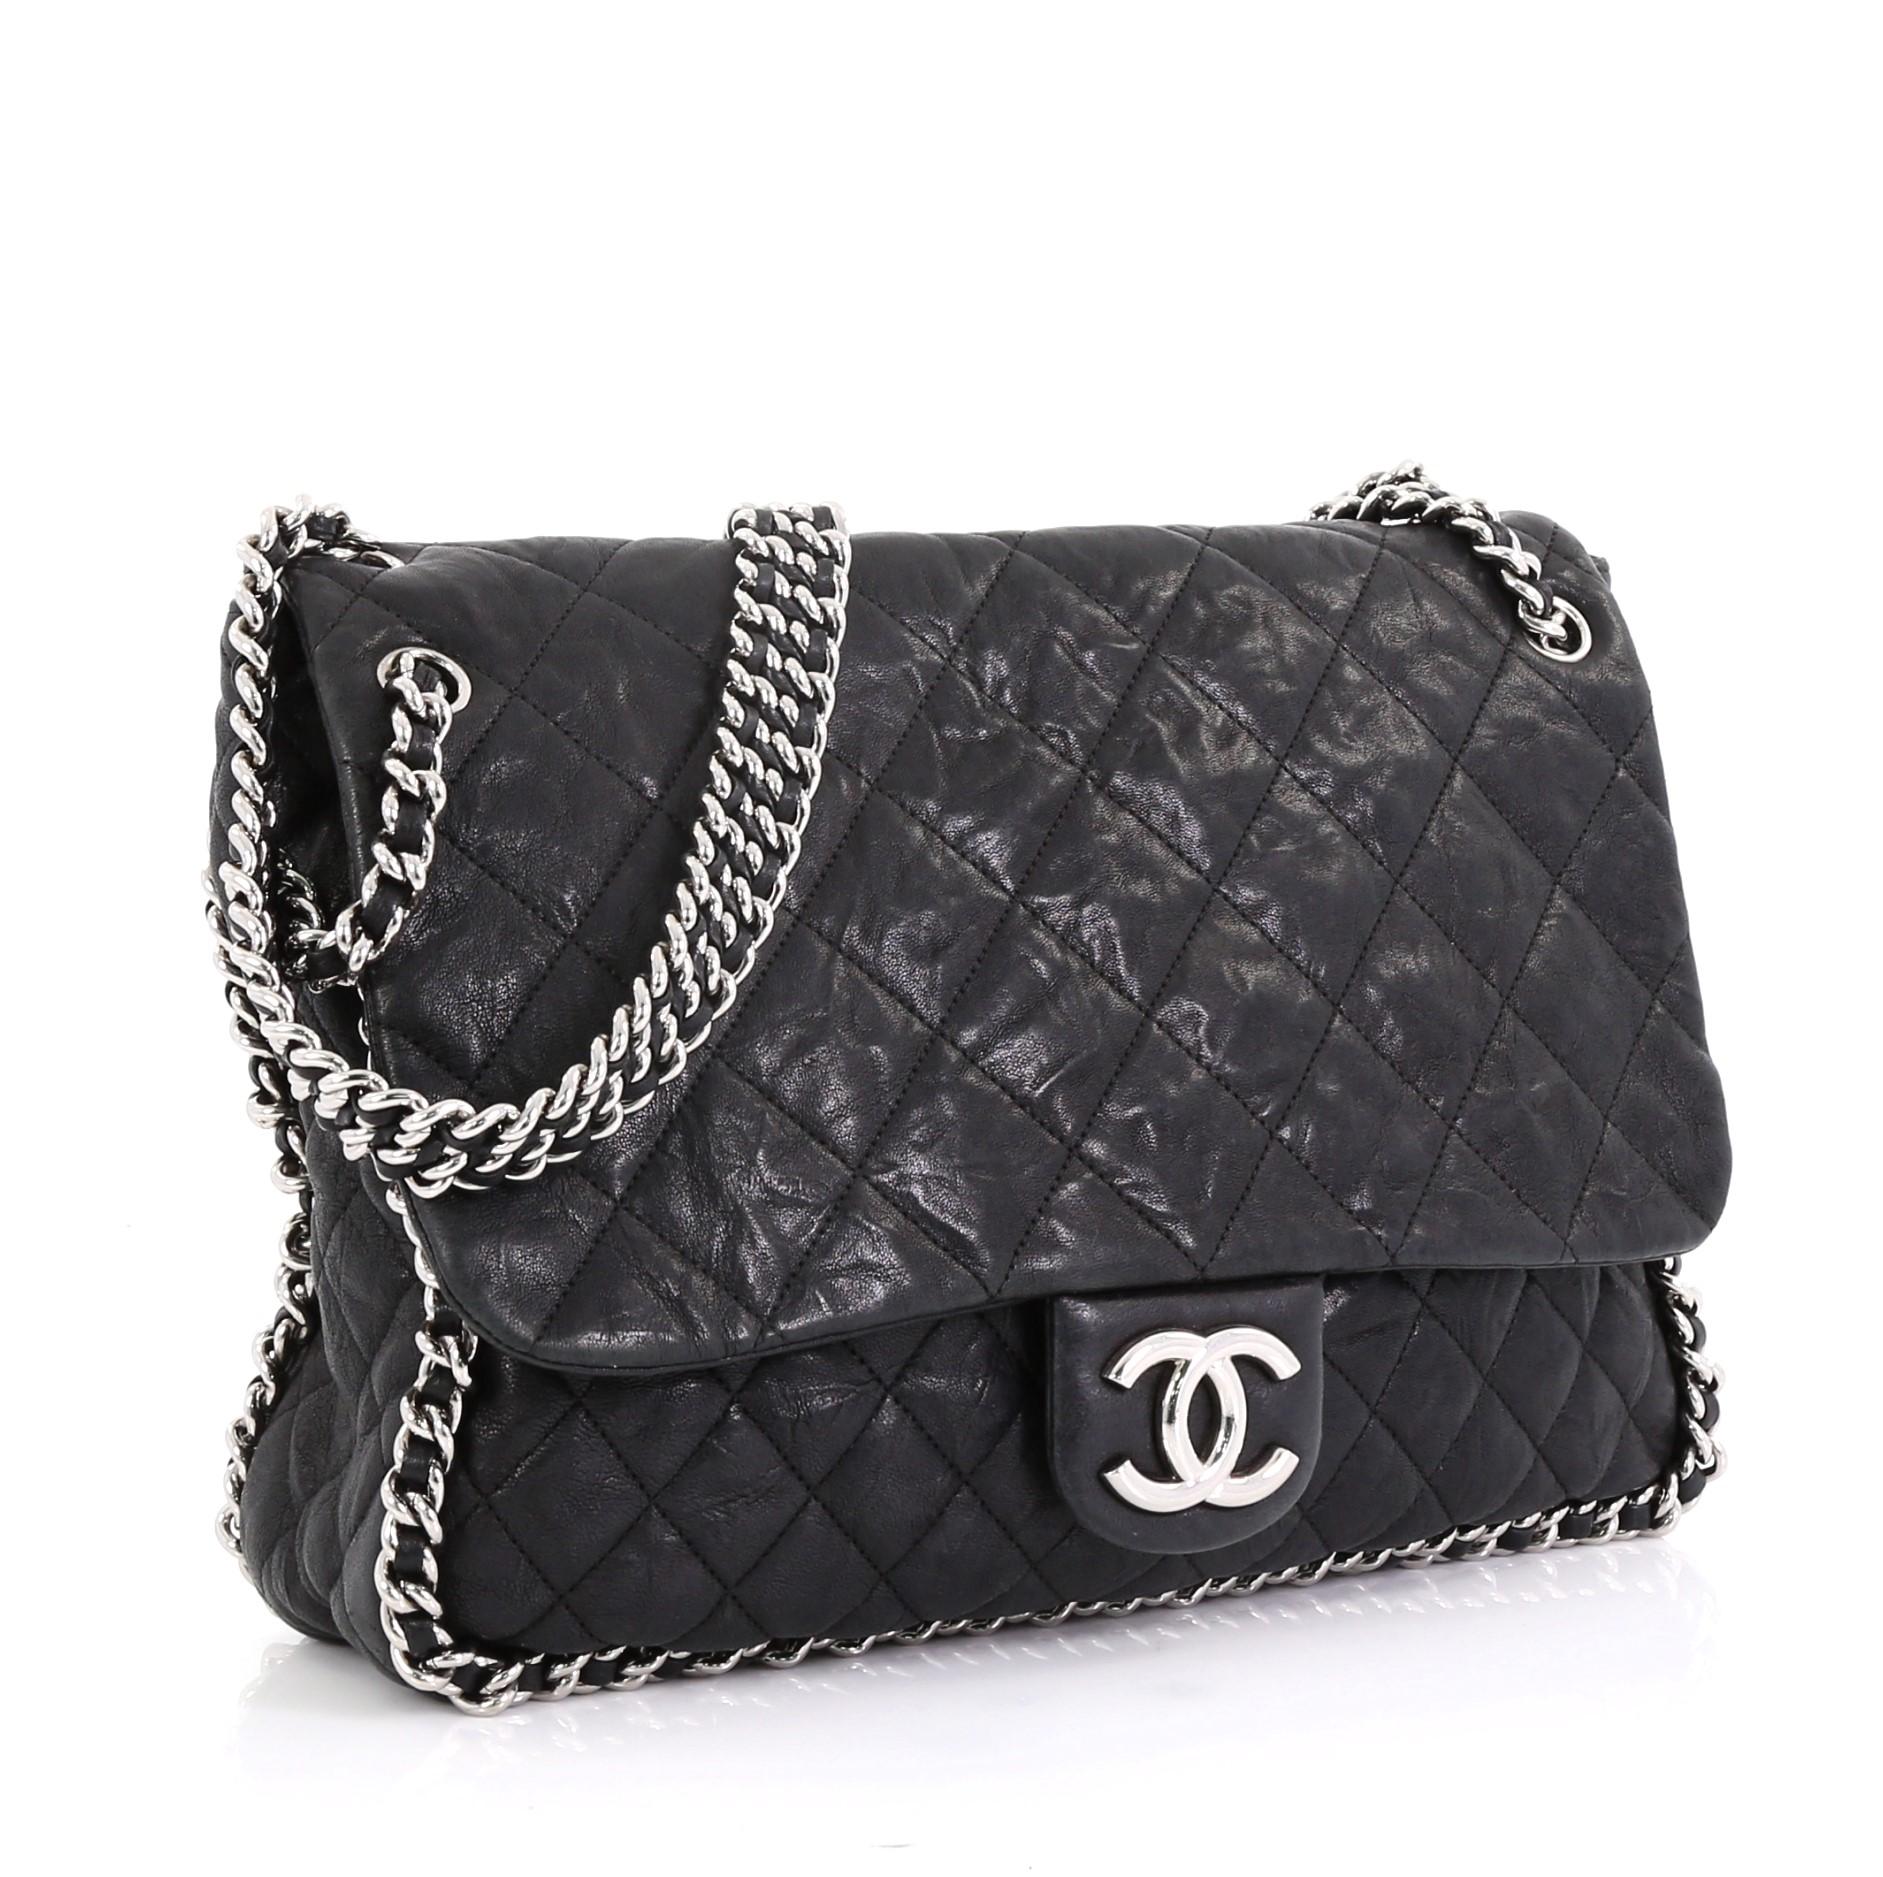 This Chanel Chain Around Flap Bag Quilted Leather Maxi, crafted in black quilted leather, features woven-in leather chain strap, chain-around design, frontal flap with CC logo, and silver-tone hardware. Its magnetic snap closure opens to a gray